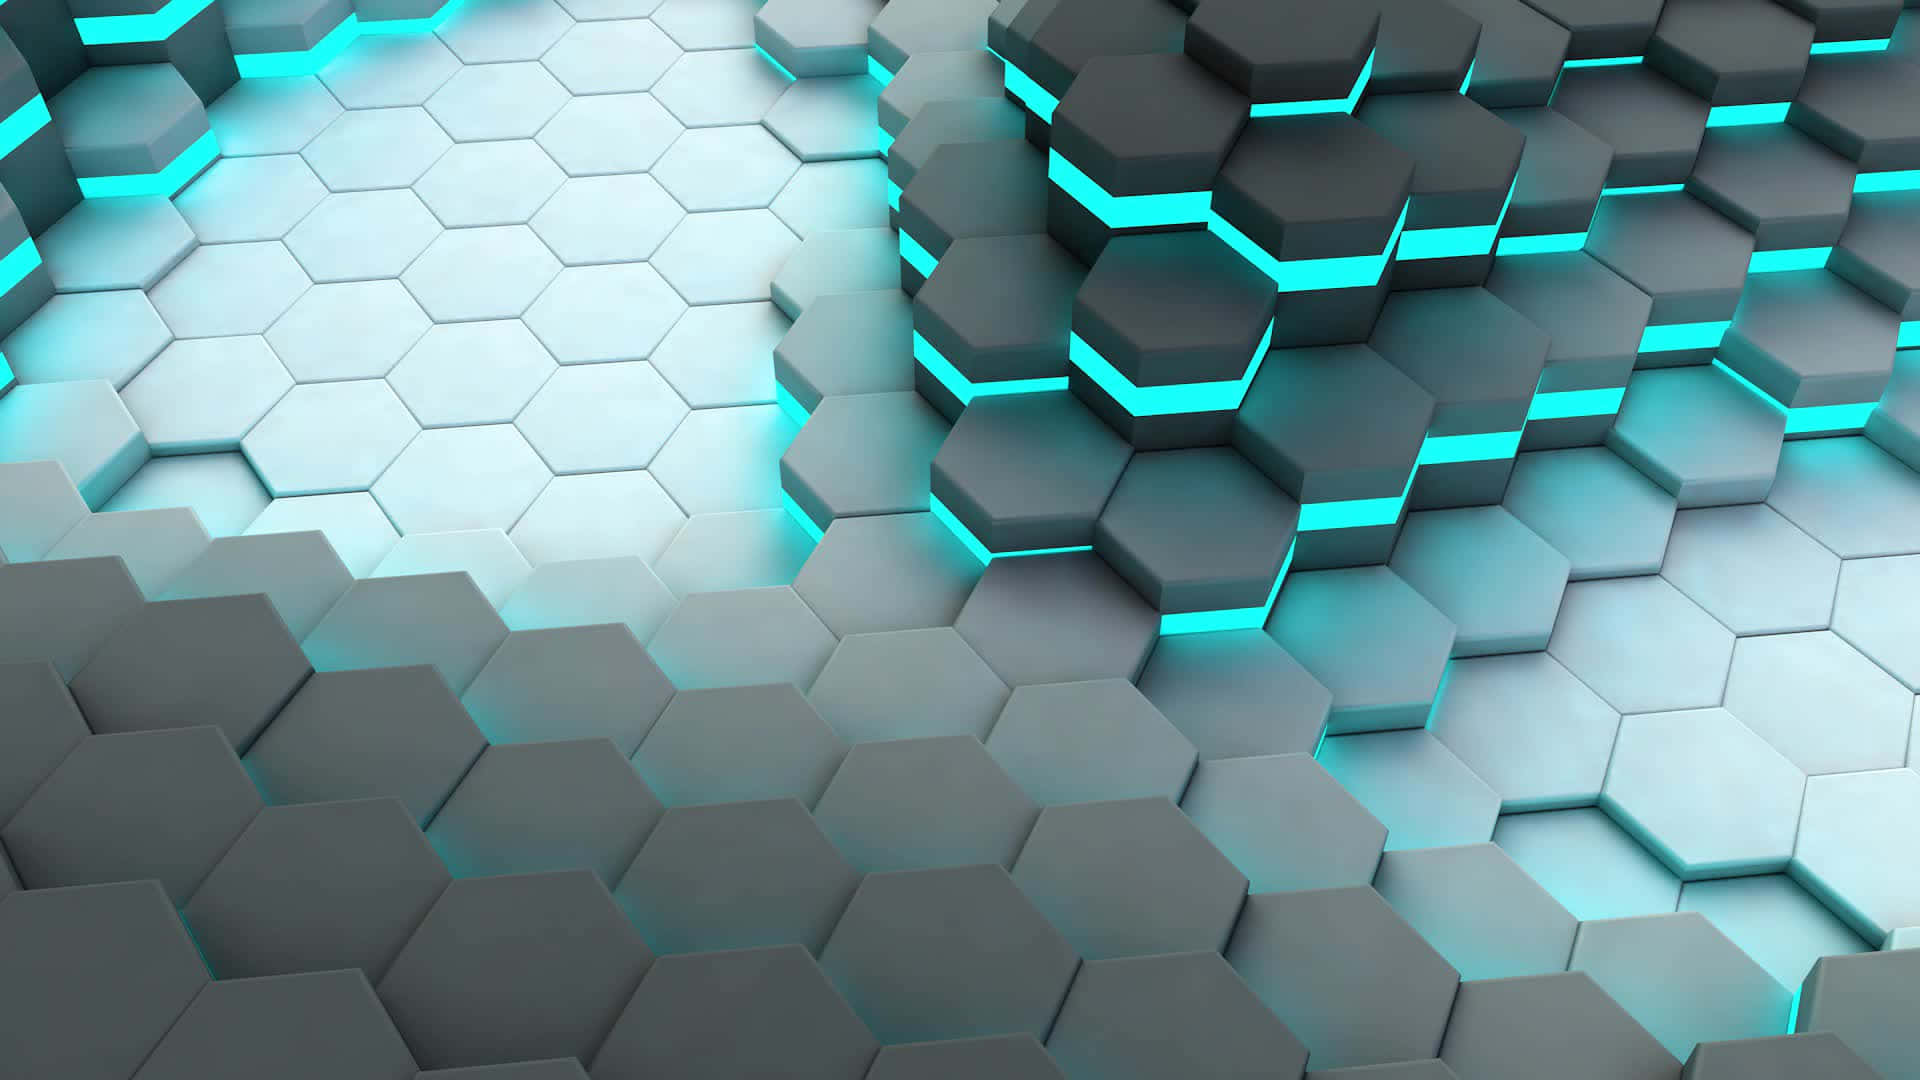 Hexagon Silver And Blue Honeycomb Picture